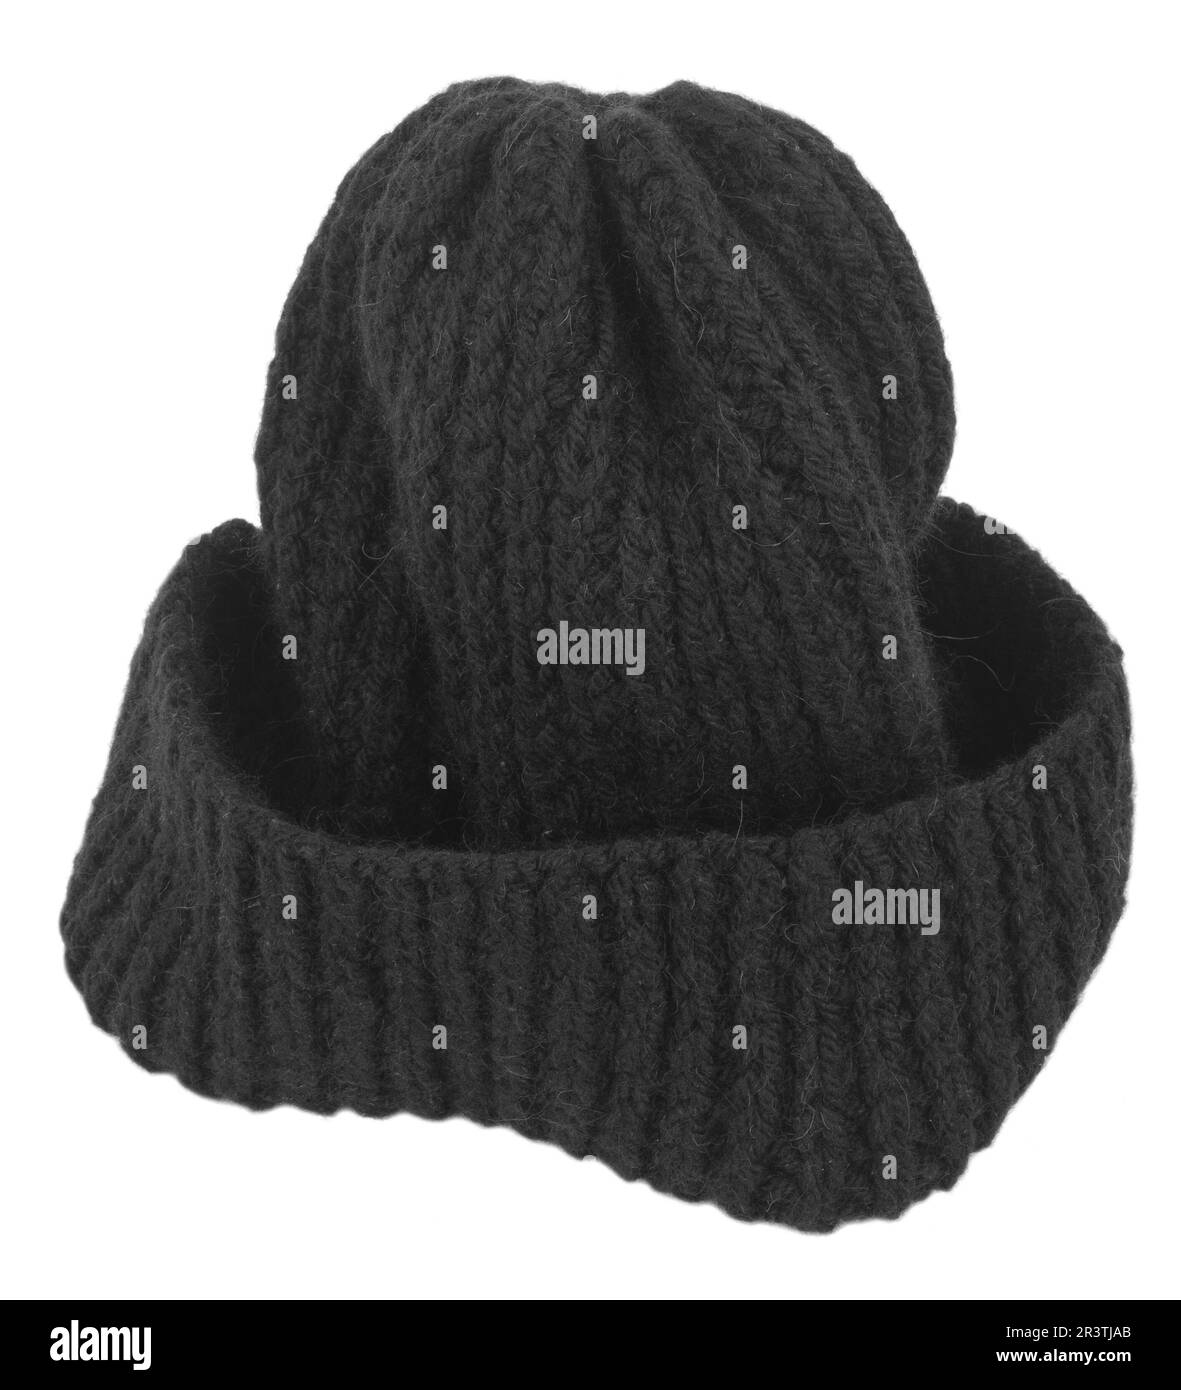 Black knitted hat Stock Photo